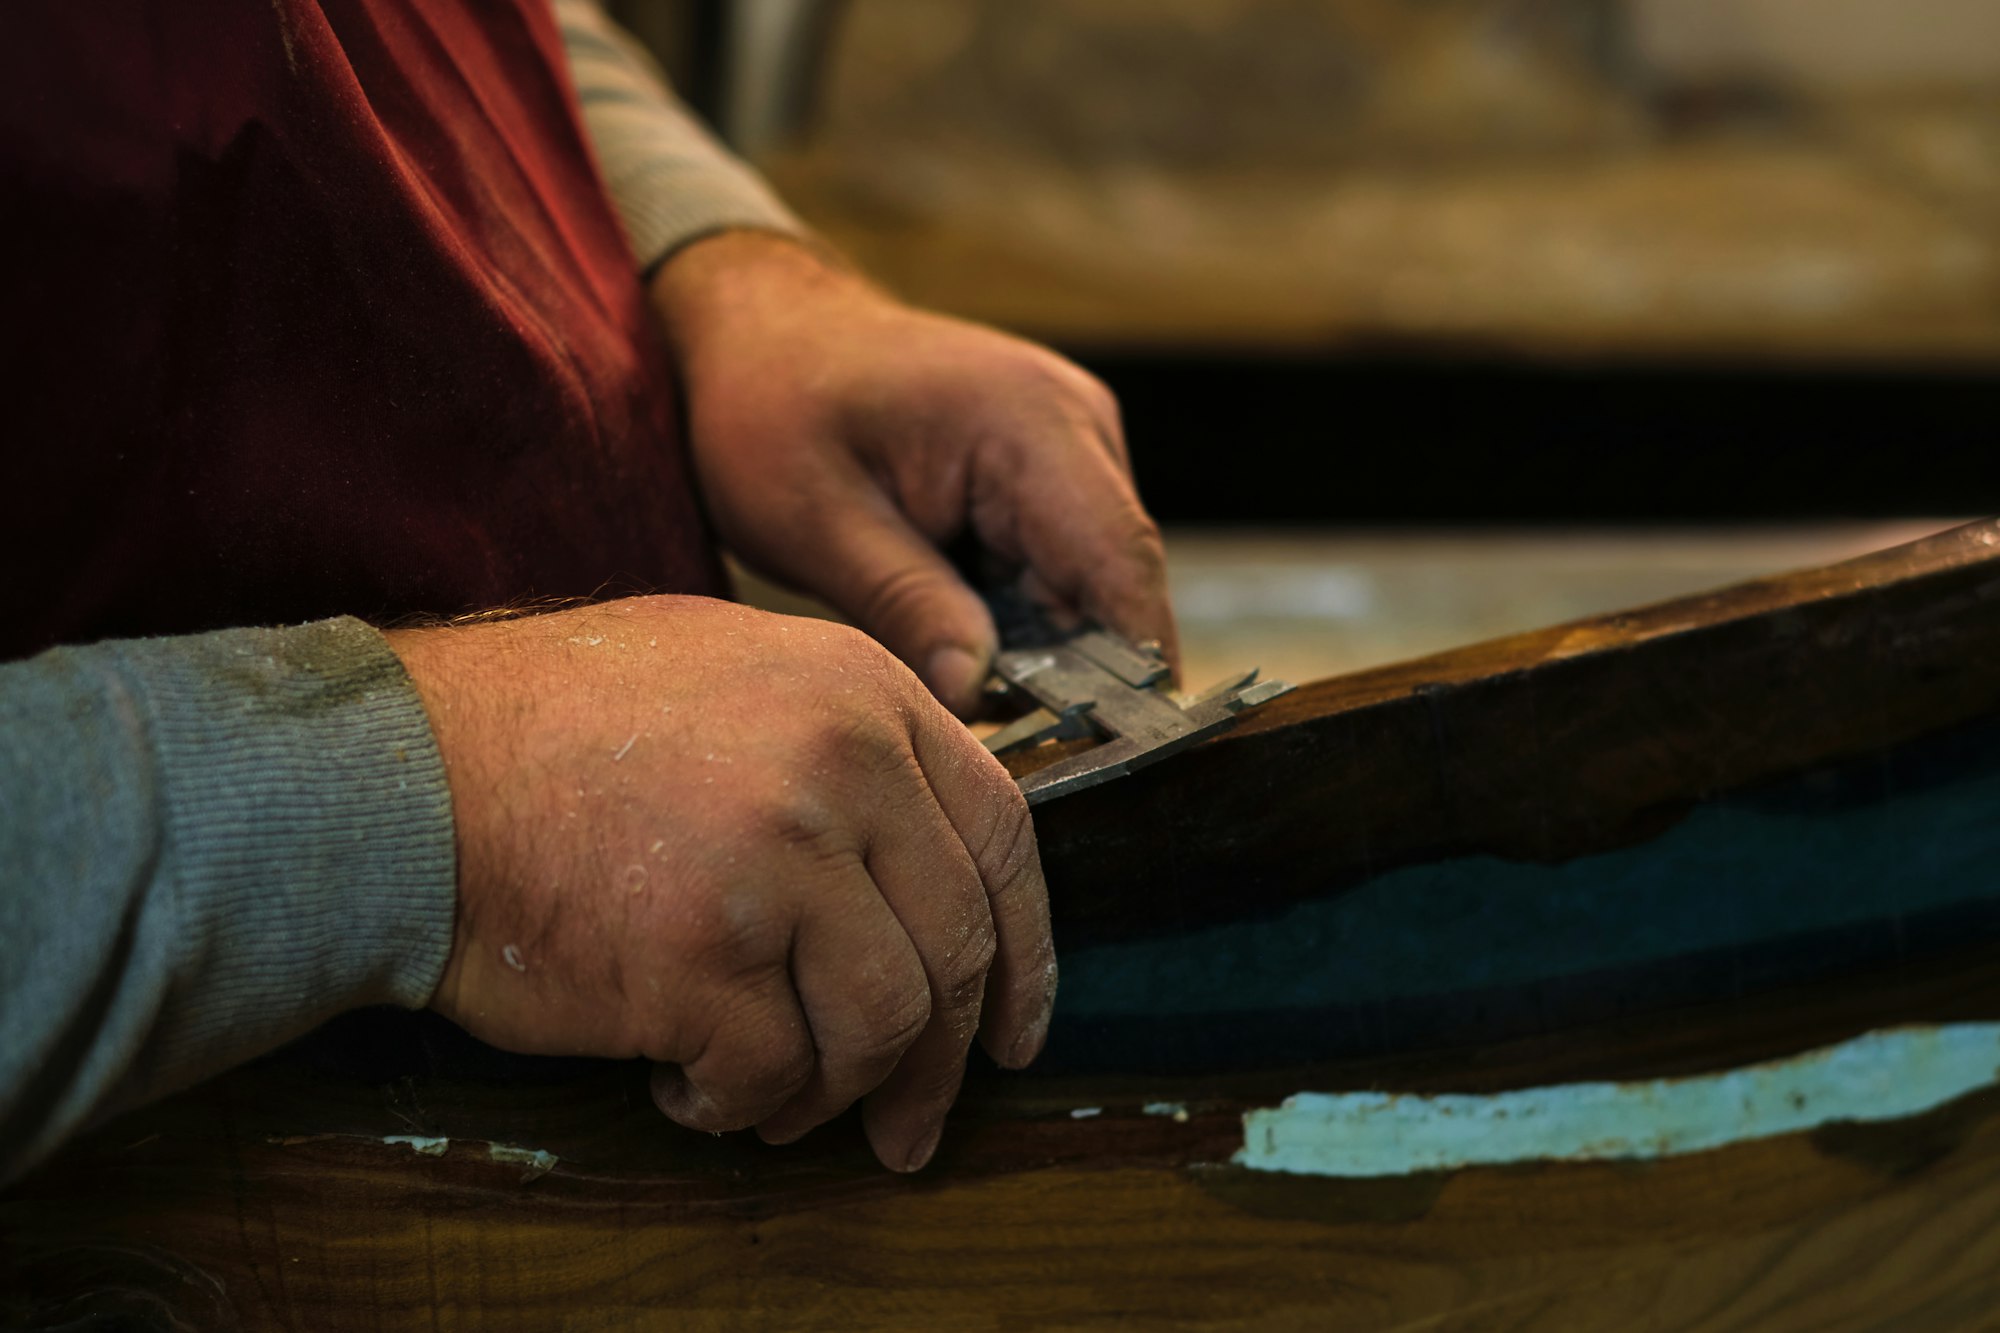 Artisan measuring with a tool; dedication, skill. Emphasizes the resurgence of traditional